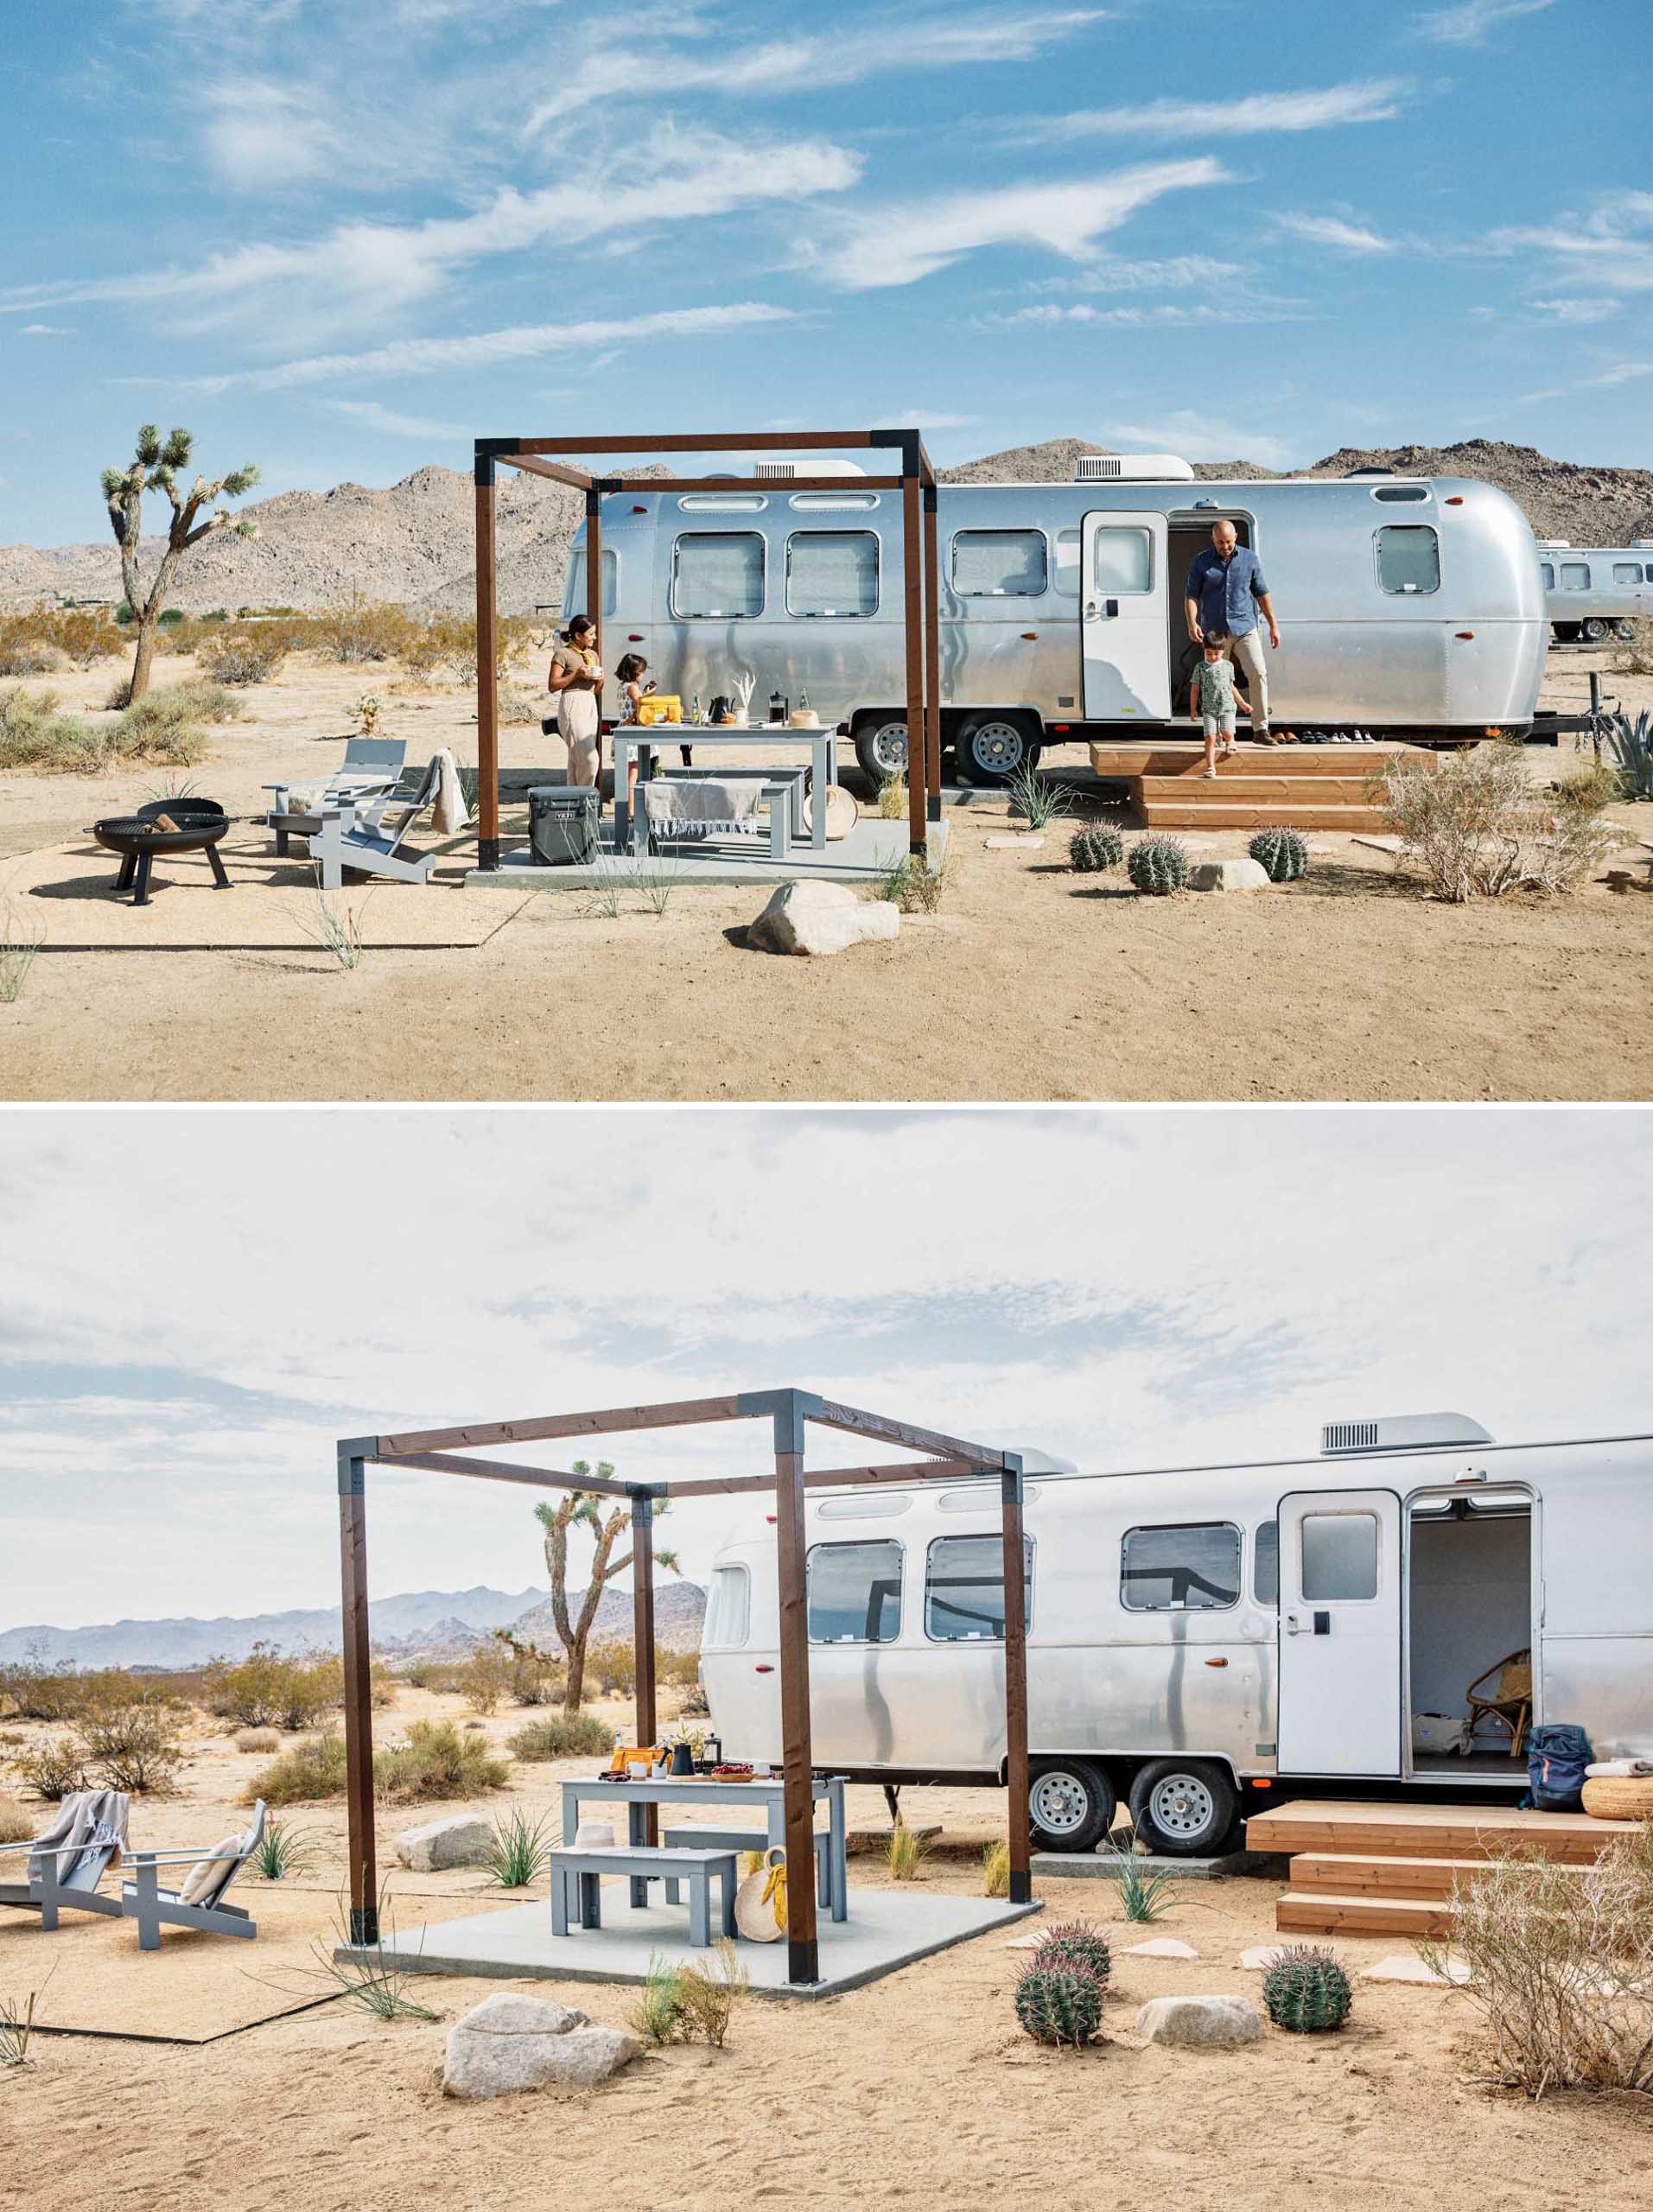 An Airstream located in the desert includes an outdoor dining area, a small seating area with a firepit, and wood stairs that lead to the Airstream entrance.